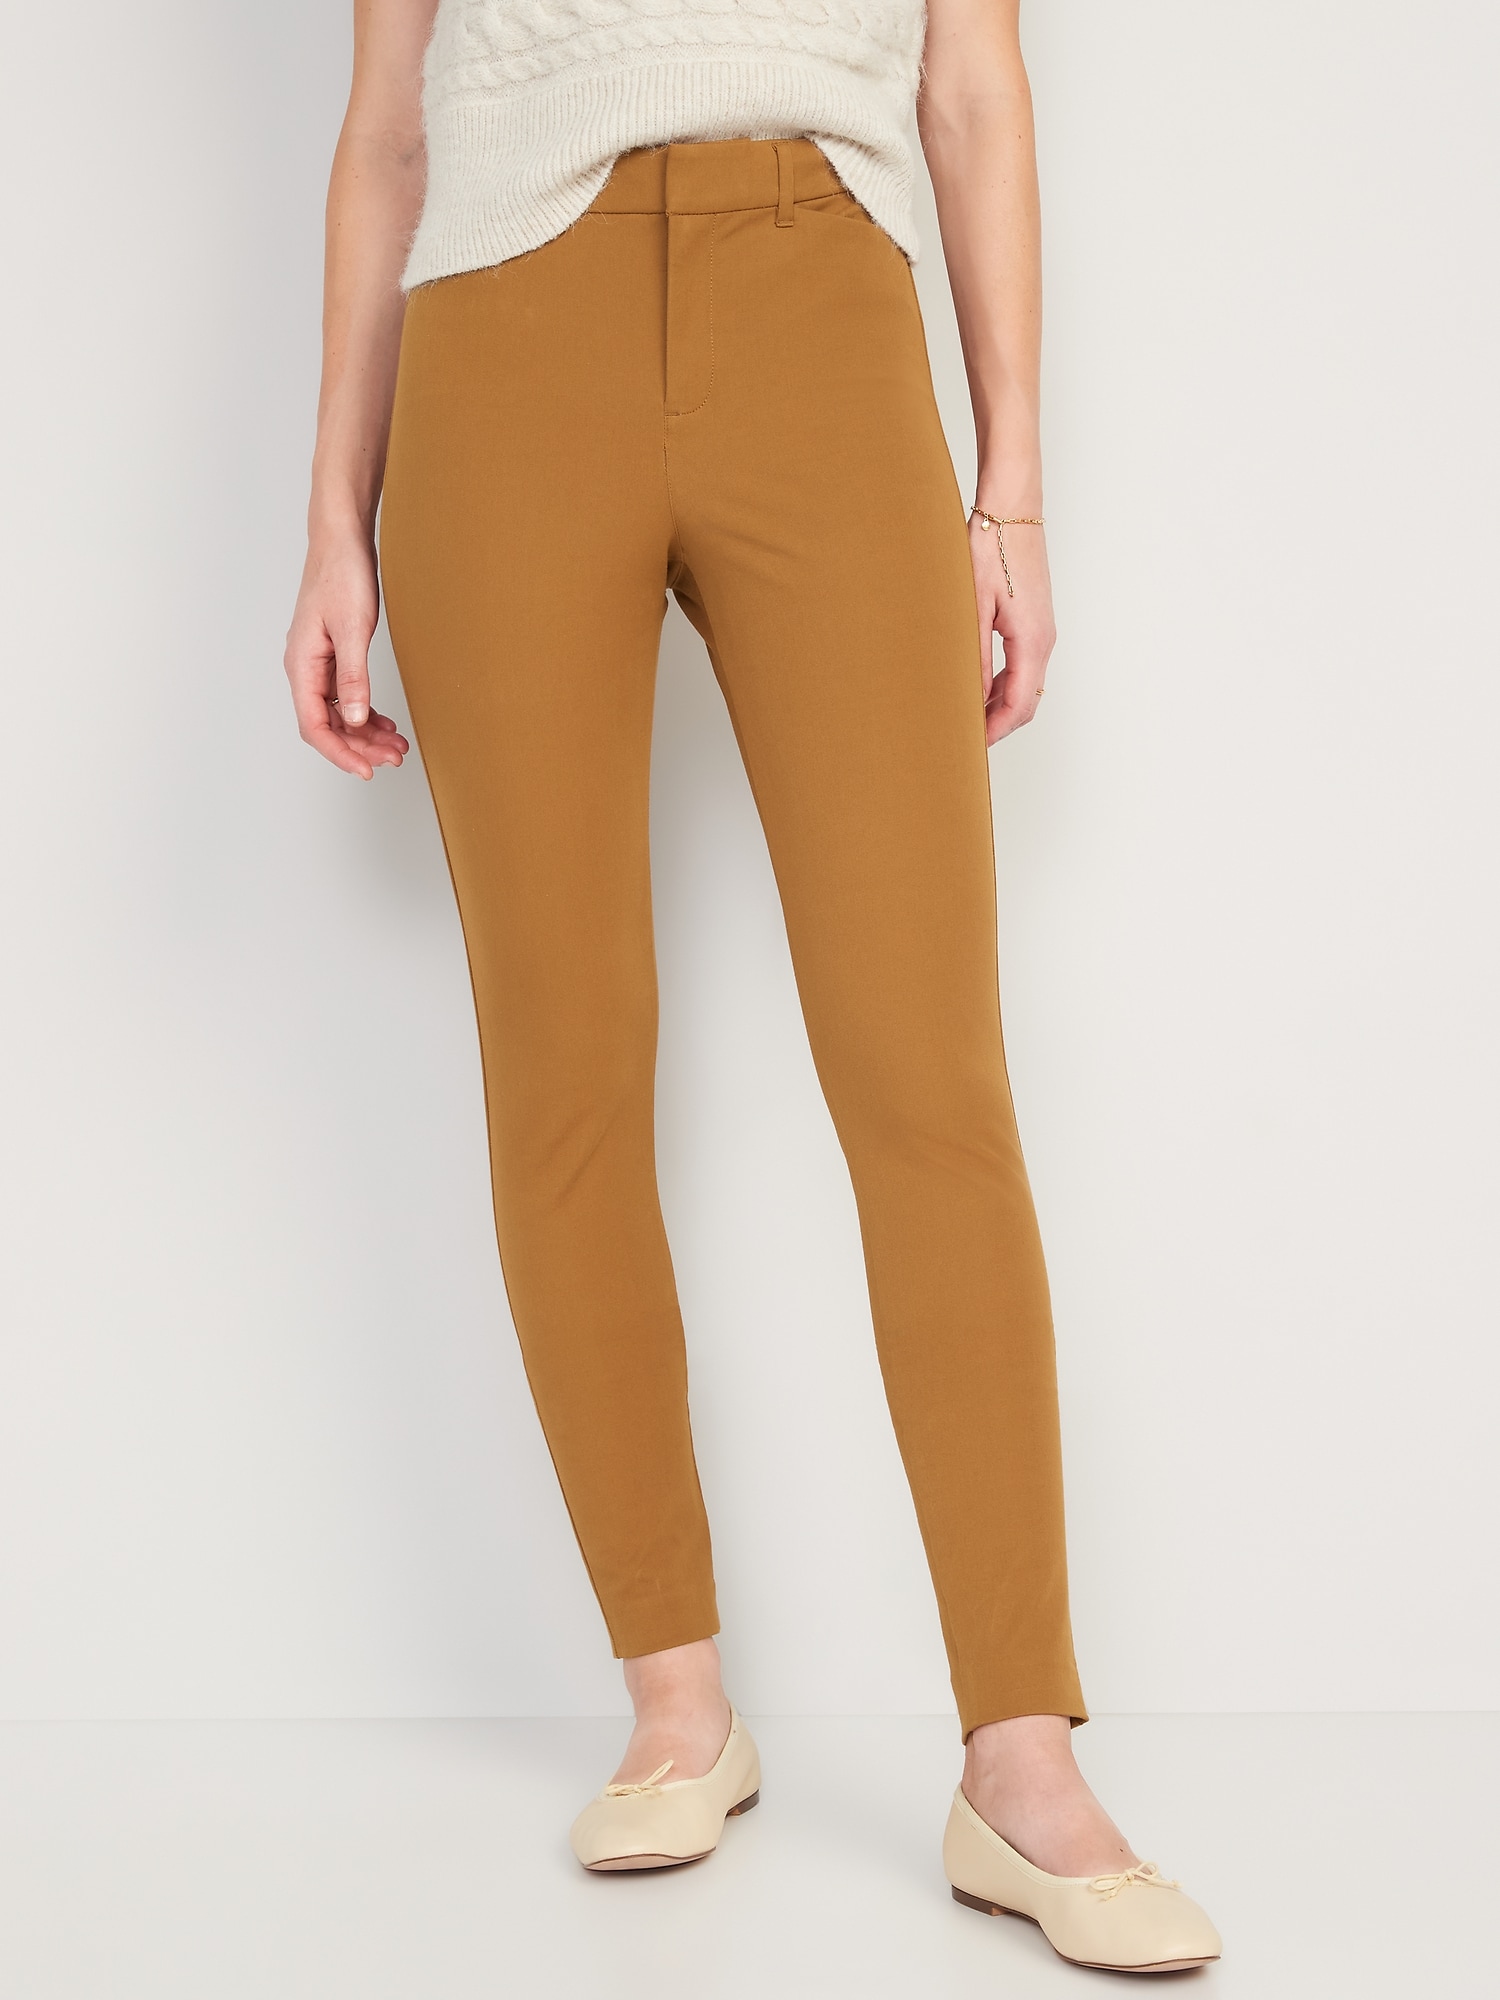 Women's Pants With Decorative Back Pockets